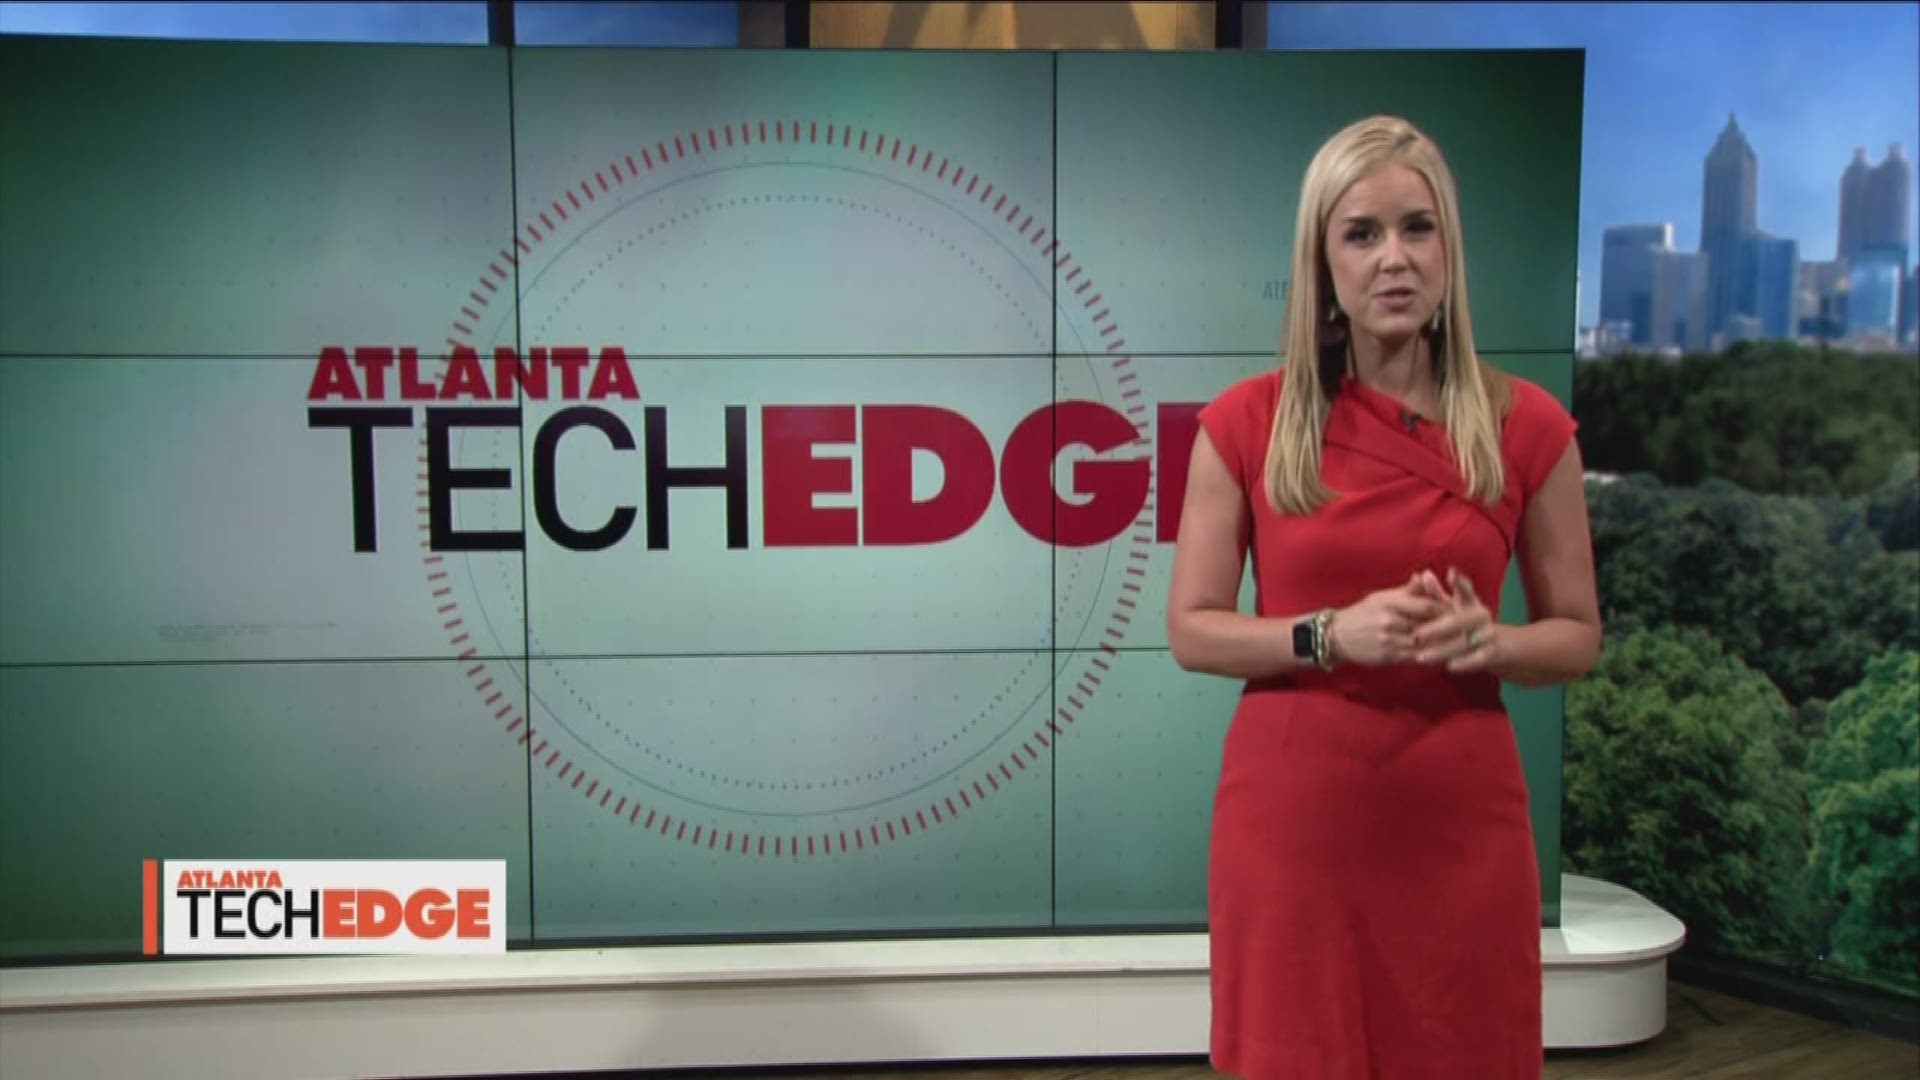 Join Cara on 'Atlanta Tech Edge' Sunday mornings at 1:30 and 11:30 on 11Alive